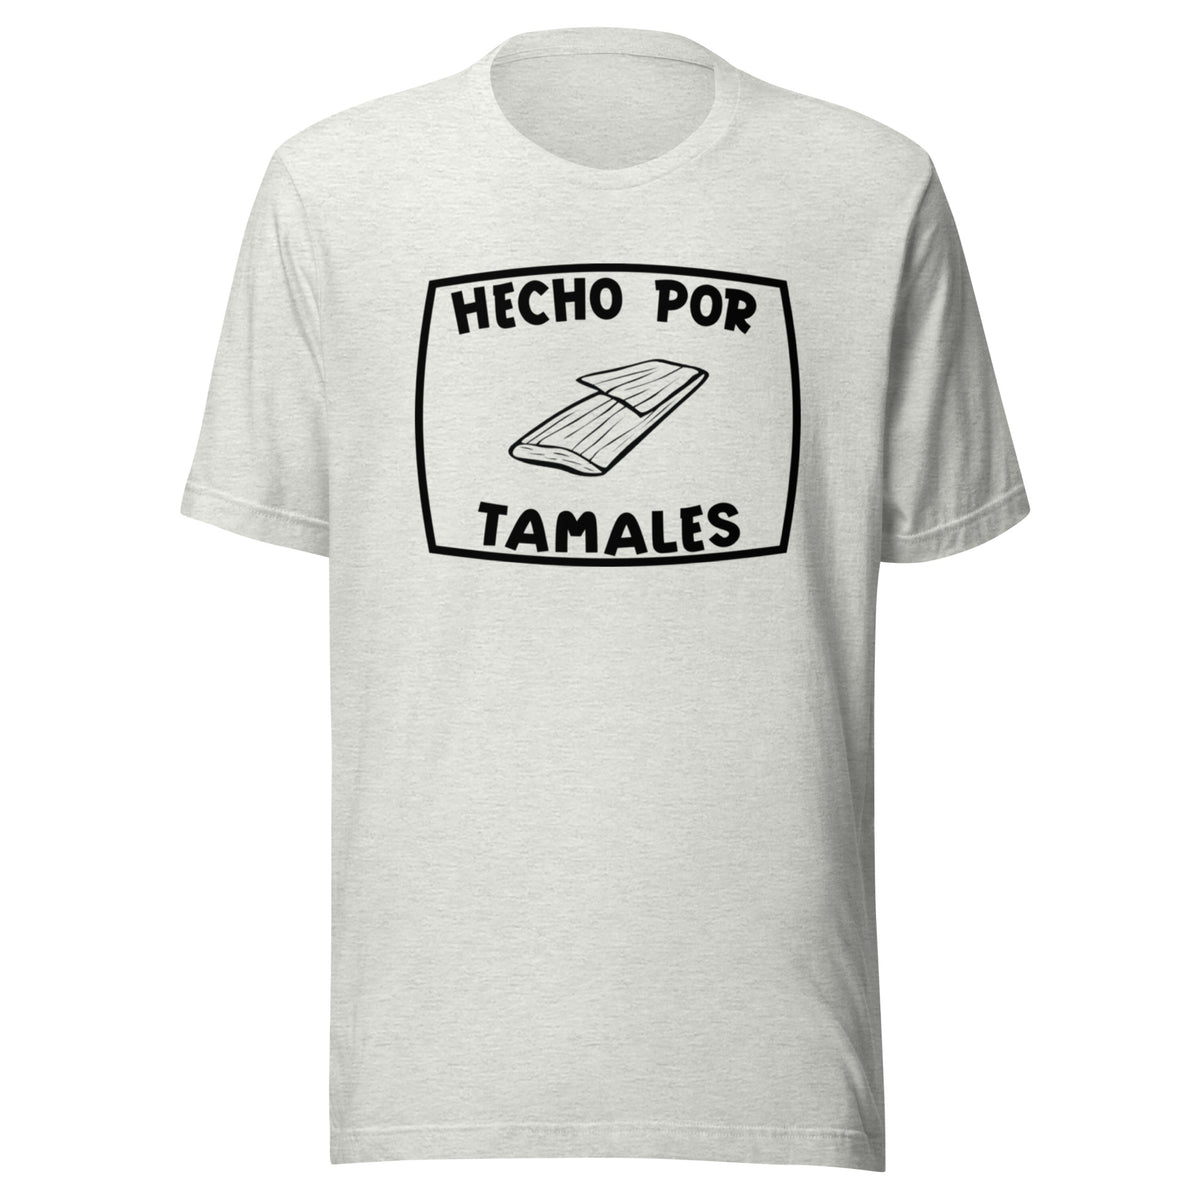 Hecho Por Tamales T-shirt (Made by Tamales)